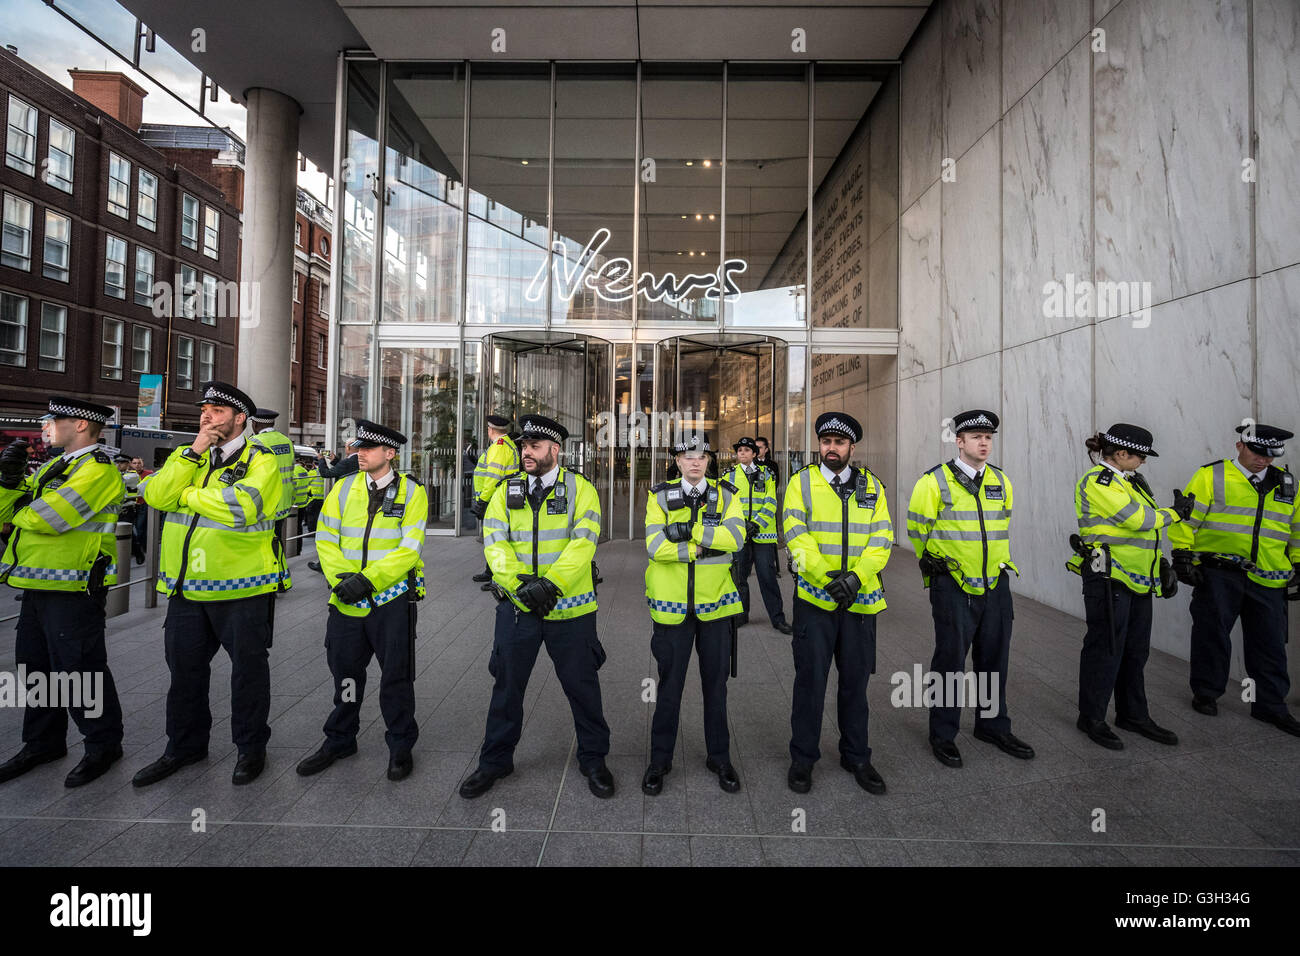 London, UK. 24th June, 2016. Police form a line outside the offices of Rupert Murdoch’s News International in London Bridge during a post EU referendum protest led by a few hundred pro-refugee protesters and anti-government anarchist groups marched from Aldgate in east London to News UK HQ in London Bridge Credit:  Guy Corbishley/Alamy Live News Stock Photo